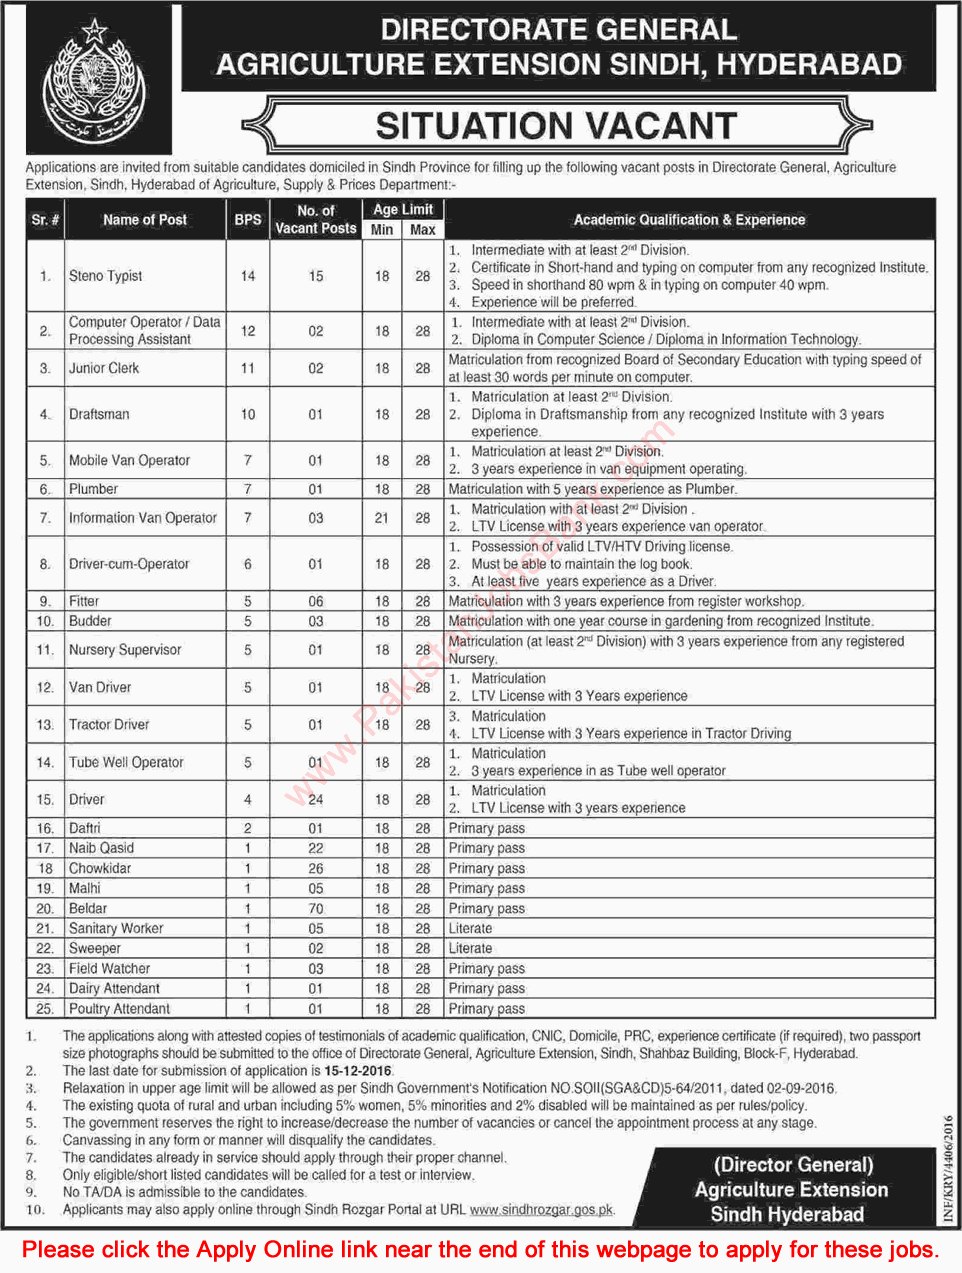 Agriculture Extension Department Sindh Jobs 2016 November / December Apply Online Latest